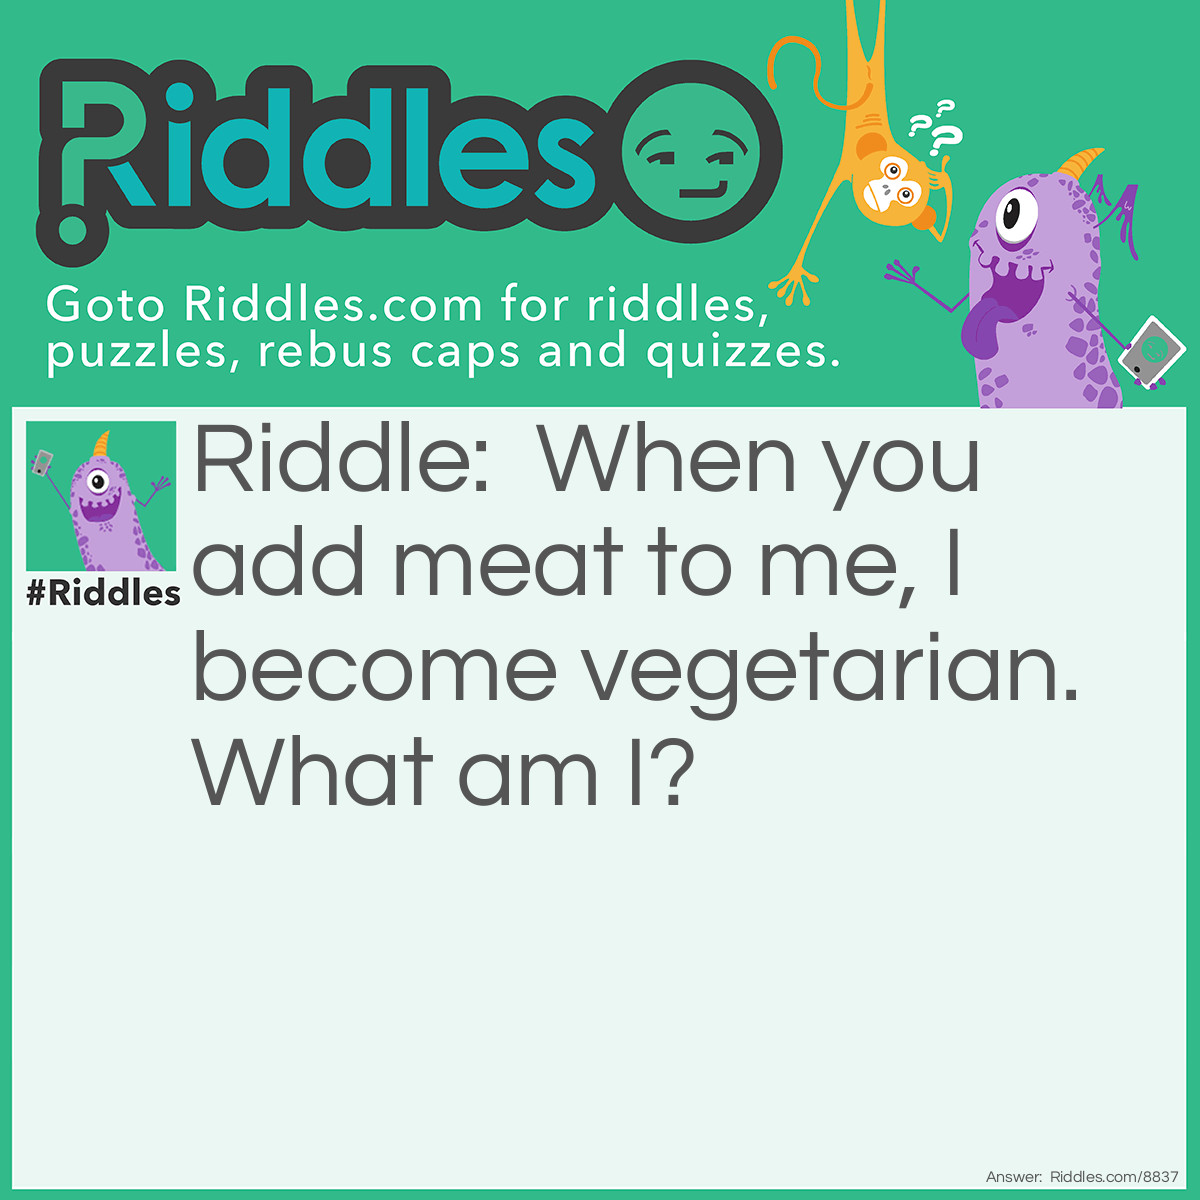 Riddle: When you add meat to me, I become vegetarian. What am I? Answer: Mince